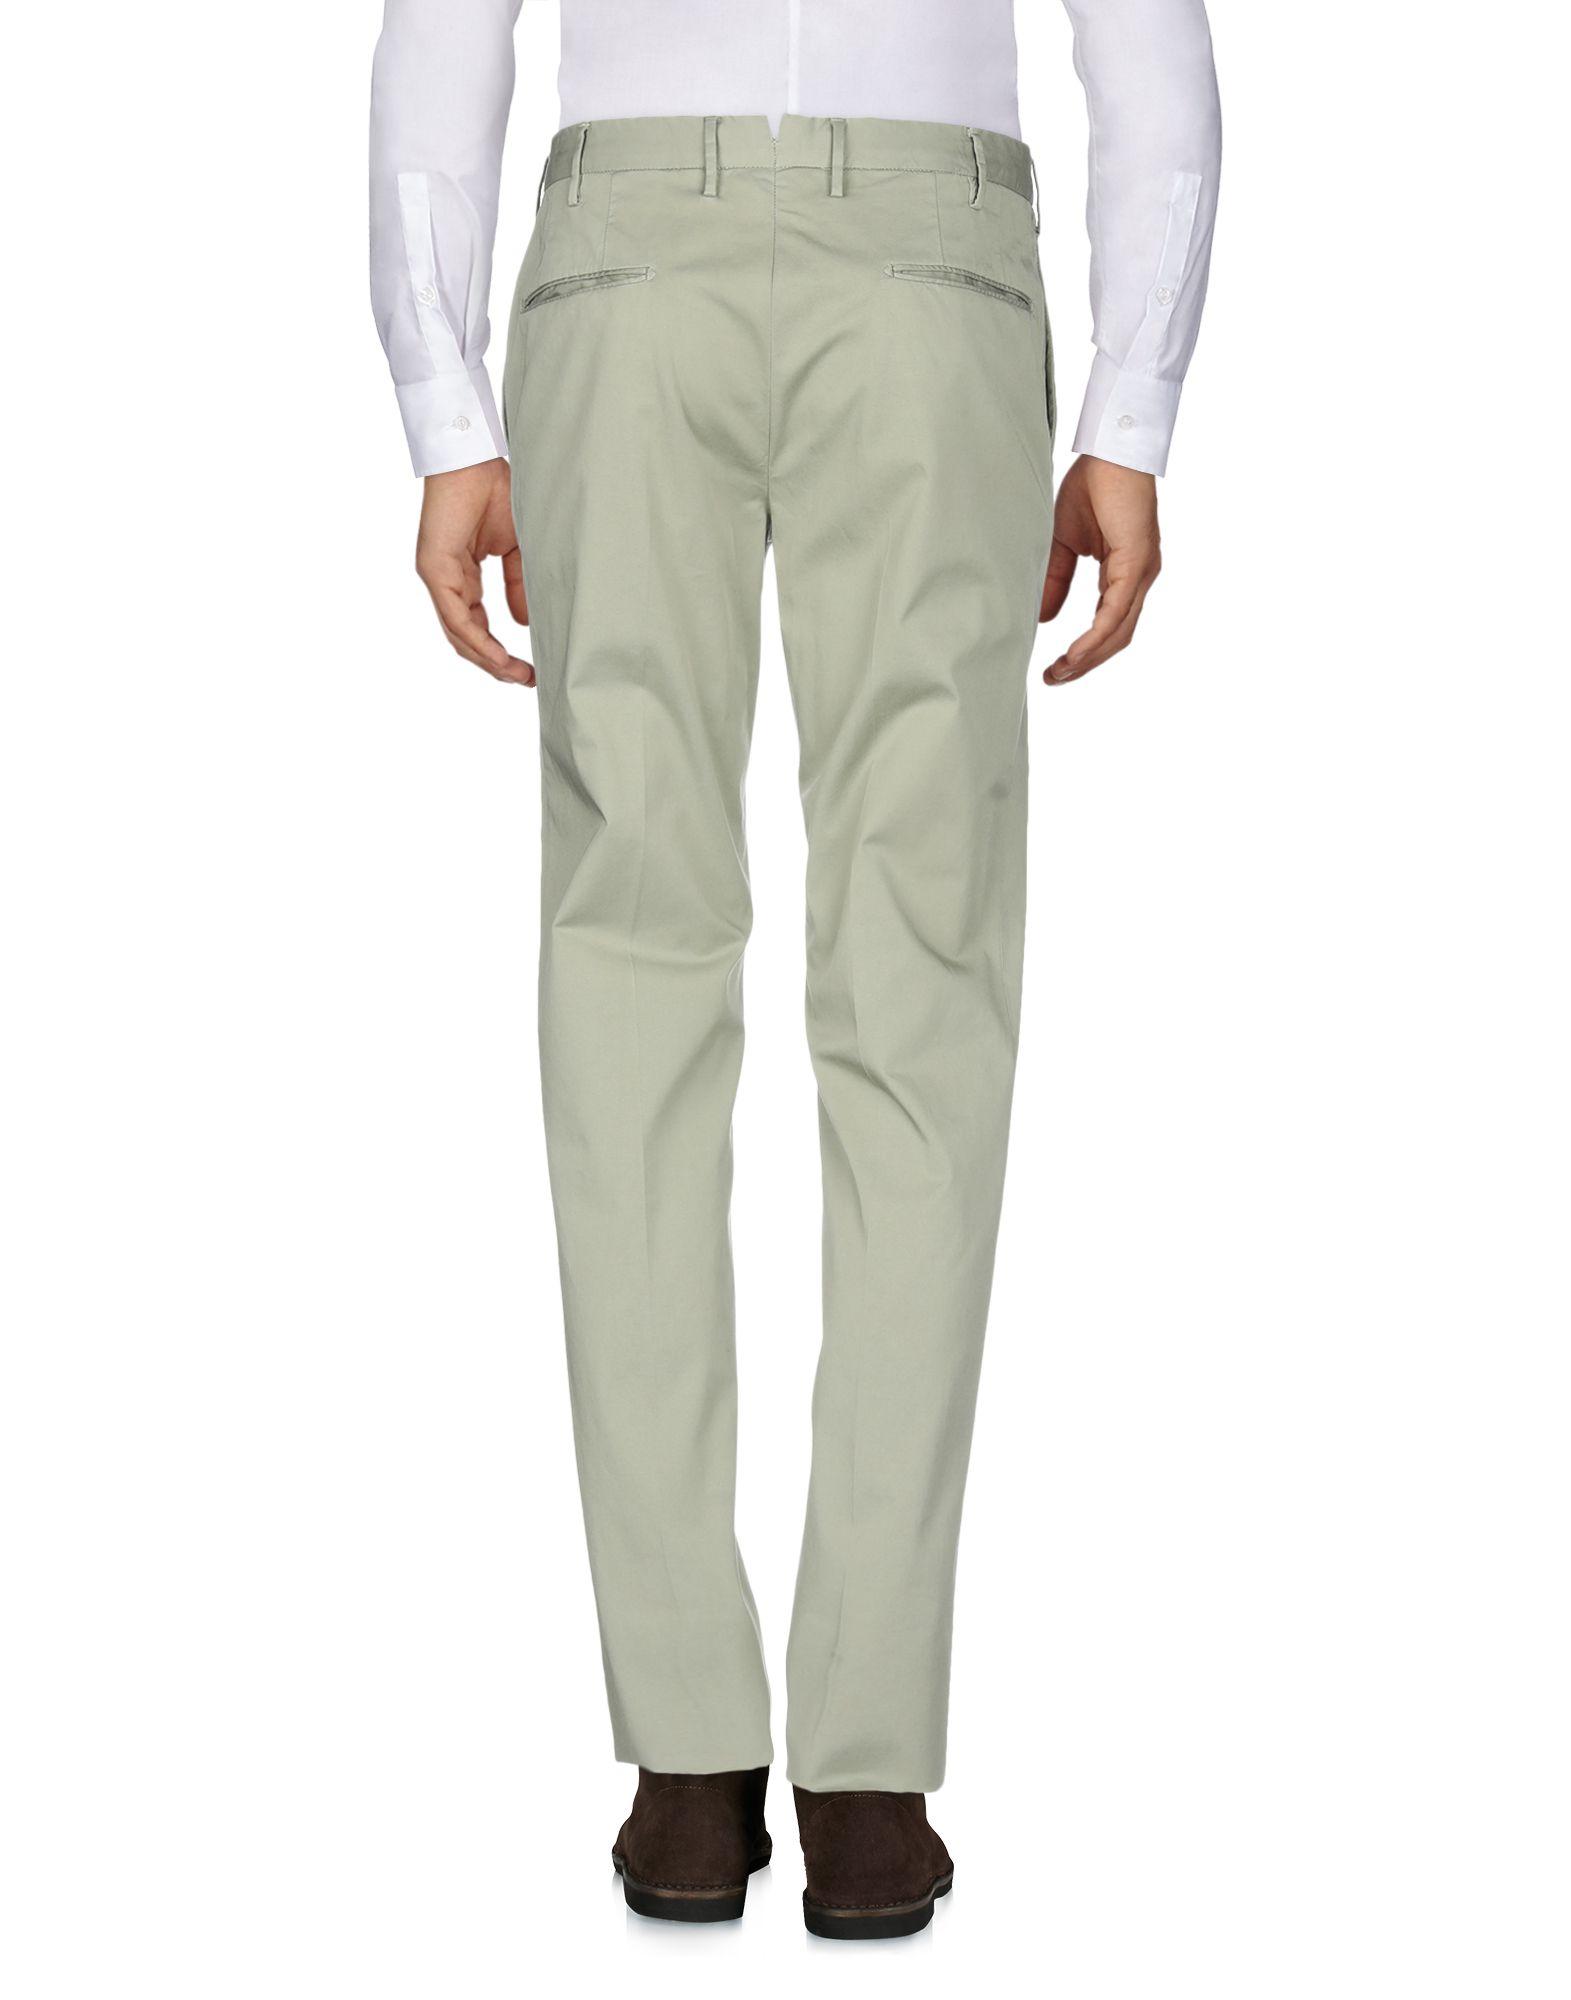 Incotex Cotton Casual Pants in Light Green (Green) for Men - Lyst